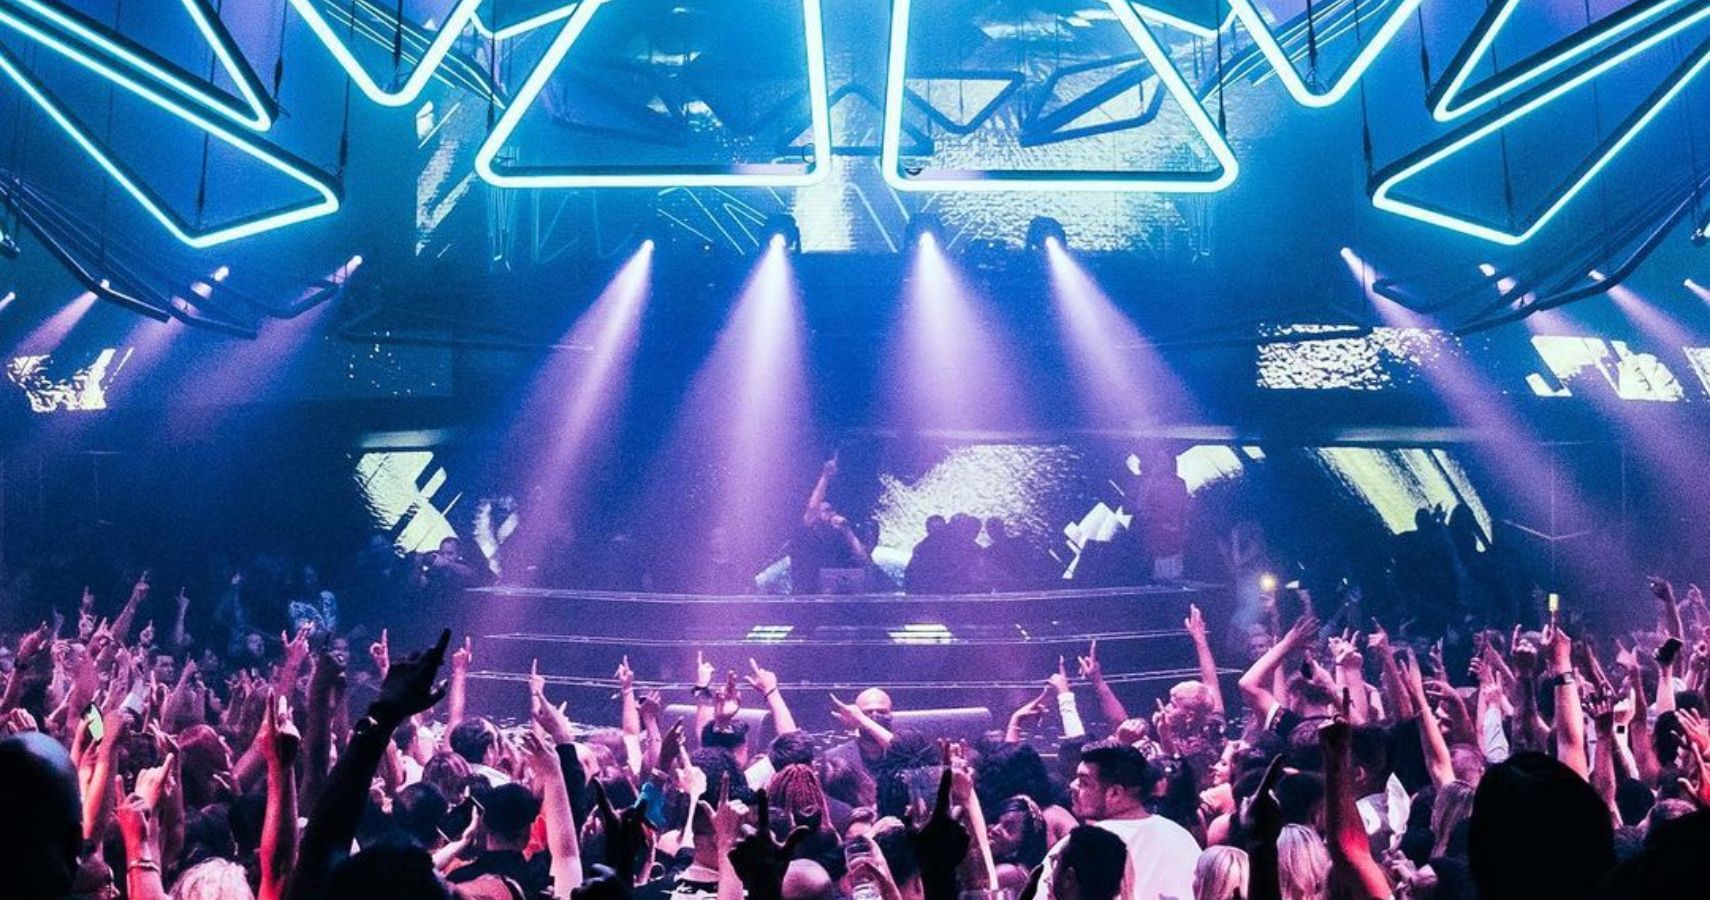 The Most Expensive Nightclubs And Bars In Las Vegas, Ranked